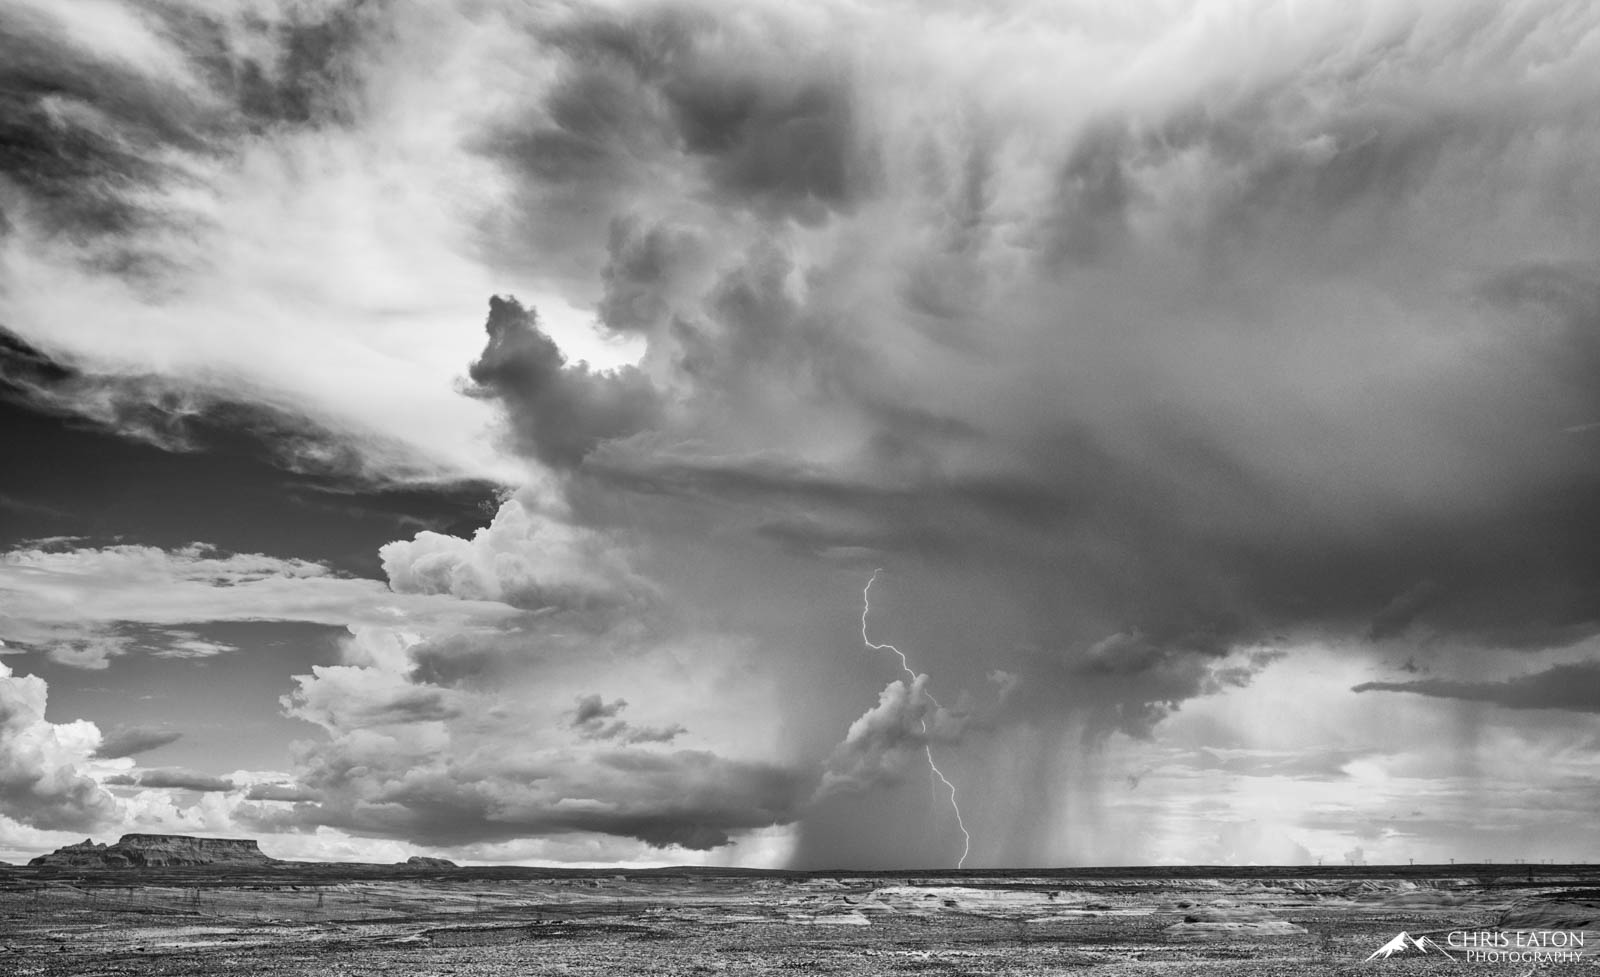 A classic thunderstorm ... the flat base of the updraft column on the left with the rain core on the right and the anvil rising...